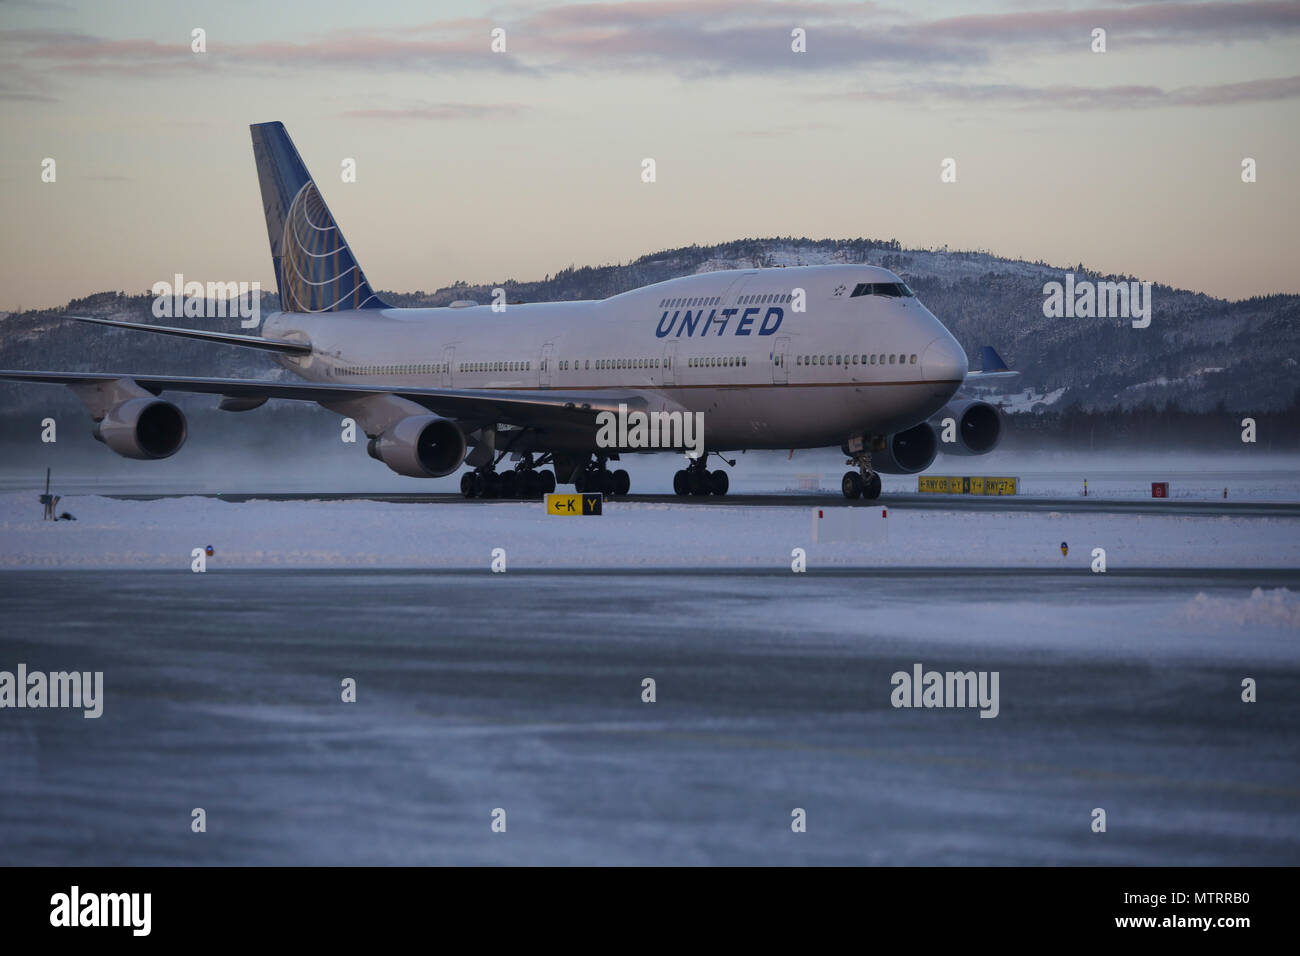 A United Airlines 747 carrying approximately 300 U.S. Marines arrives at Vaernes Garnison, Norway, Jan. 16, 2017. The Marines with Black Sea Rotational Force 17.1 arrived at Vaernes Garnison early in the morning as part of Marine Rotational Force Europe 17.1. (U.S. Marine Corps photo by Lance Cpl. Victoria Ross) Stock Photo